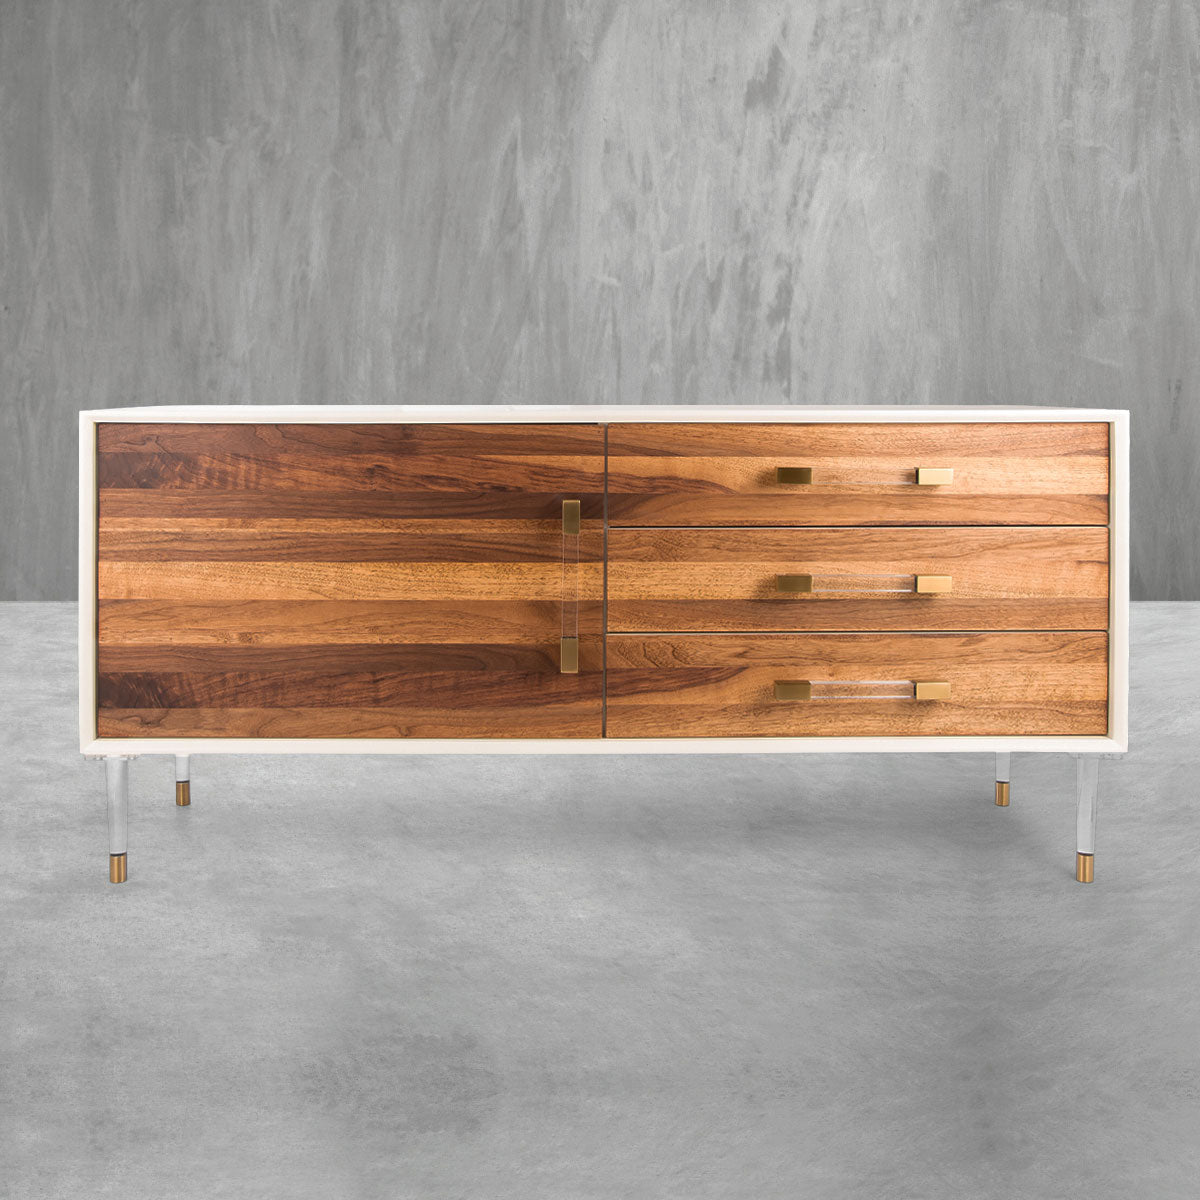 Modern credenza with a white frame, white and brass legs, three drawers with brass pulls, a single cabinet door with a Lucite pull and a medium-tone wood plank facade on all door and drawer faces.